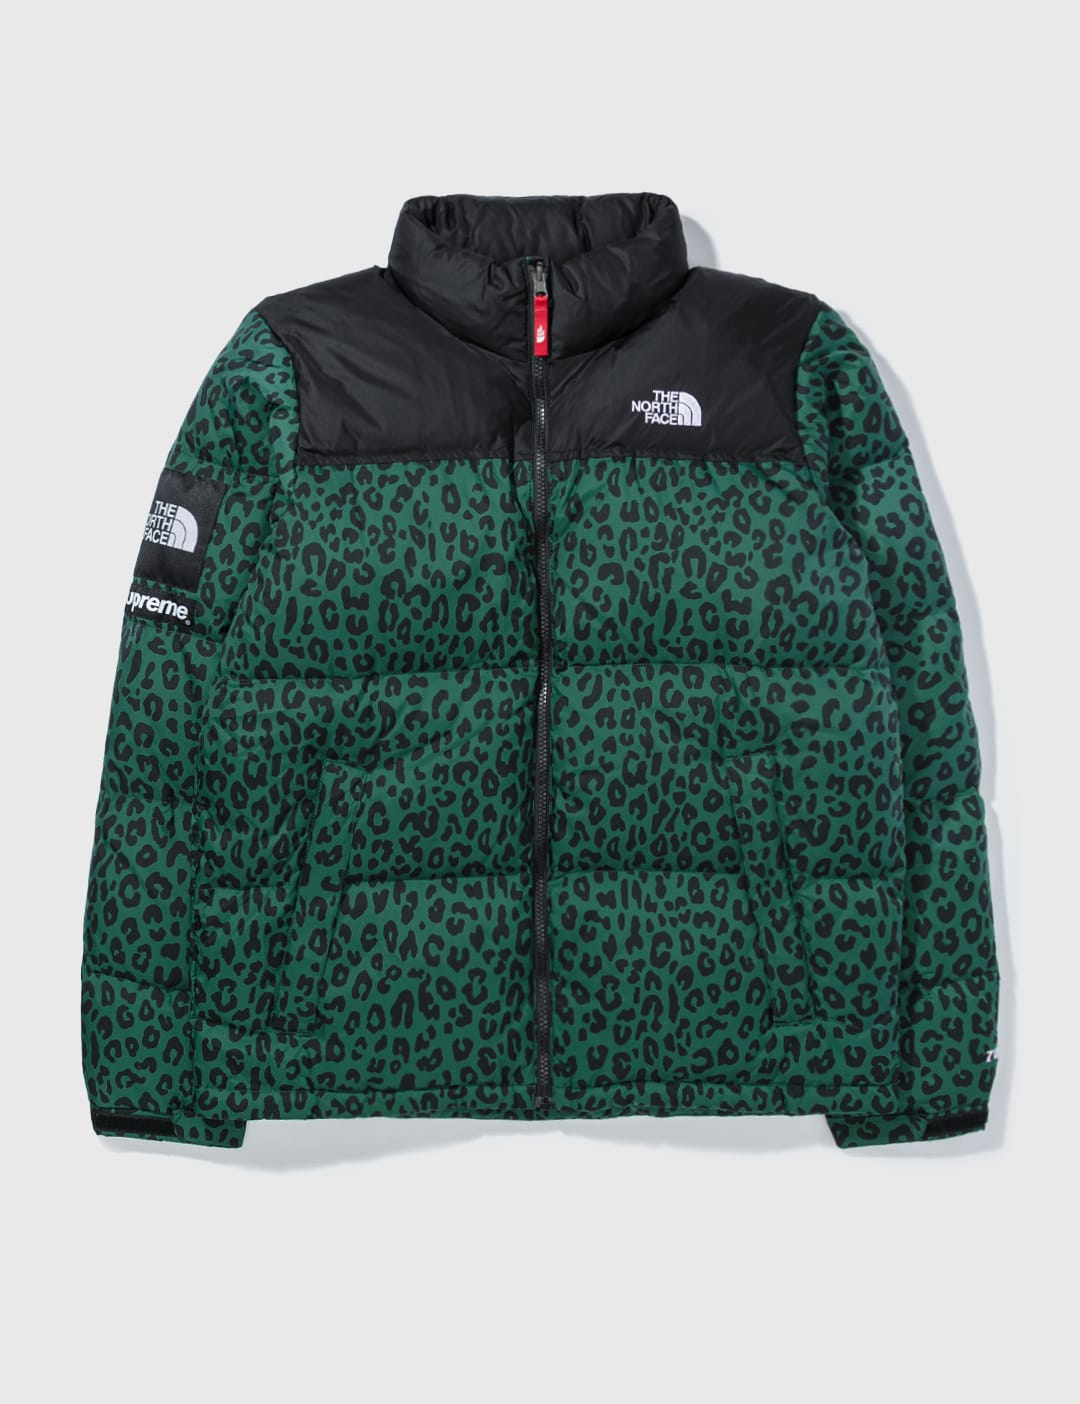 SUPREME X THE NORTH FACE 2011AW NUPTSE DOWN JACKET